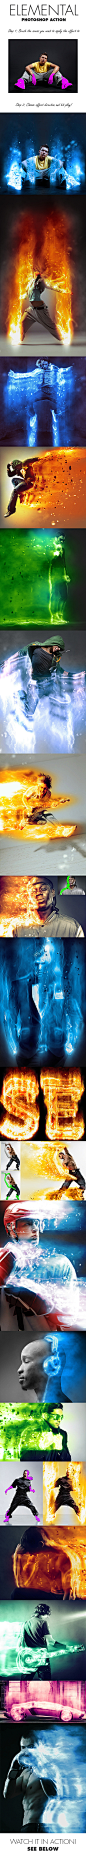 Elemental Photoshop Action - Photo Effects Actions